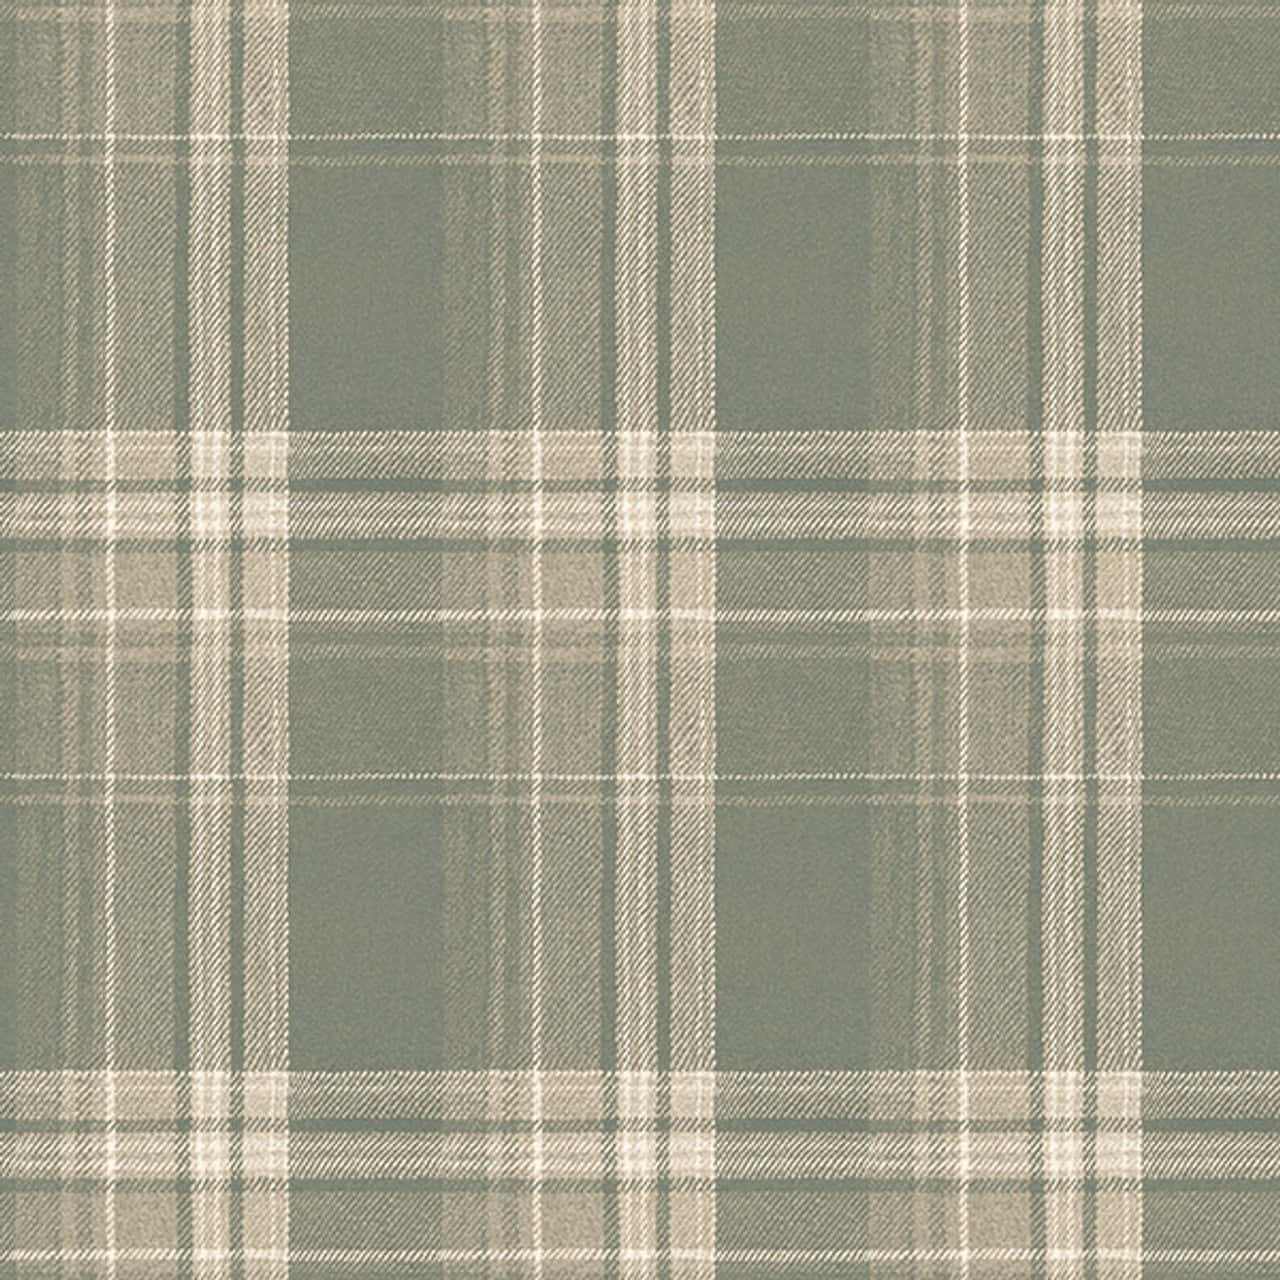 a plaid fabric with a grey and beige pattern